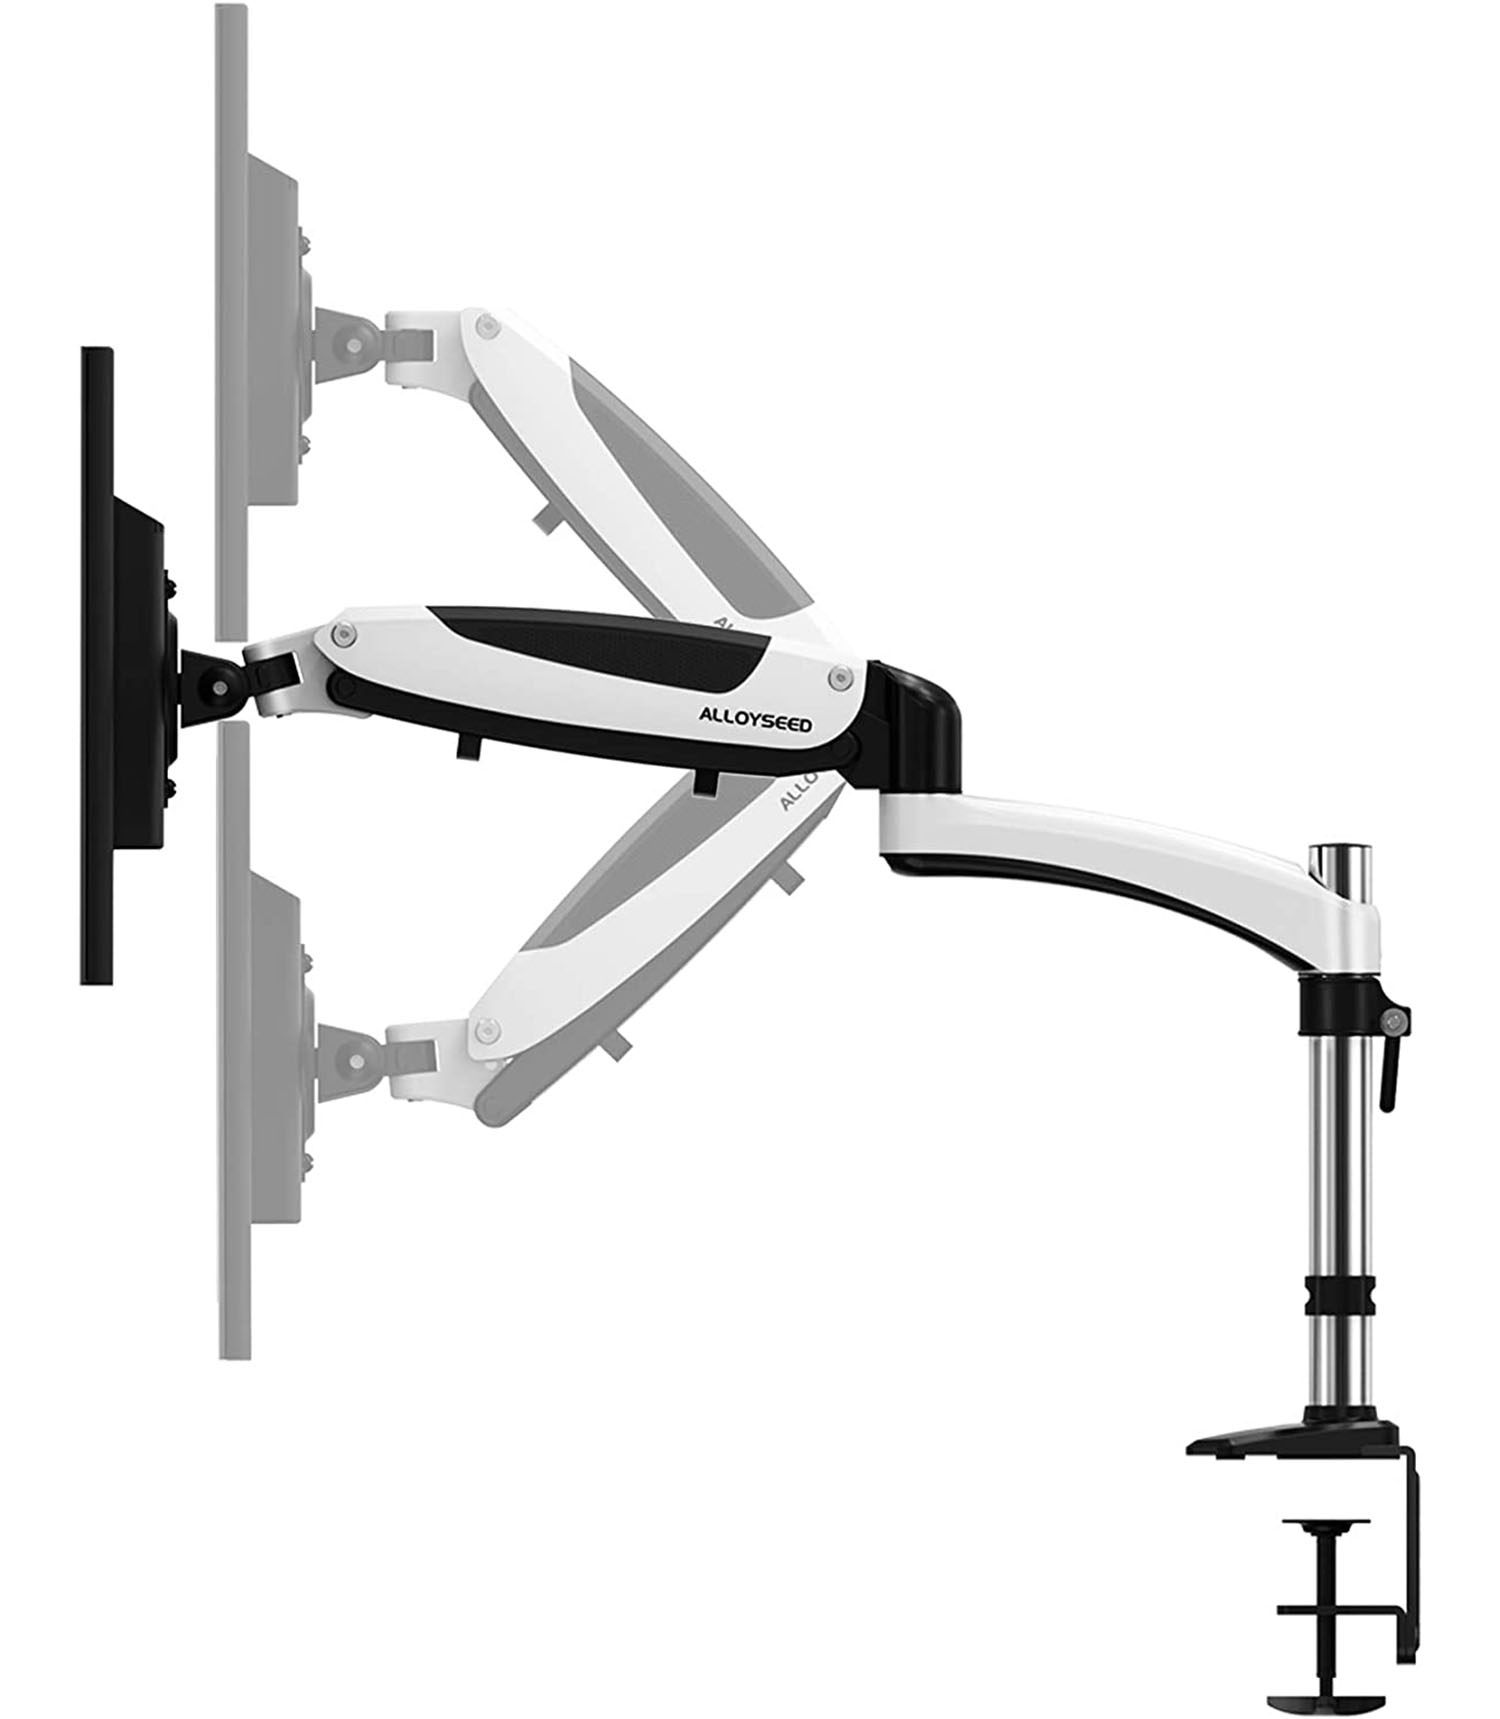 Monitor Mount Stand, Monitor Riser for 15 to 27 Inch,Holds up to 17.6lbs - image 1 of 7